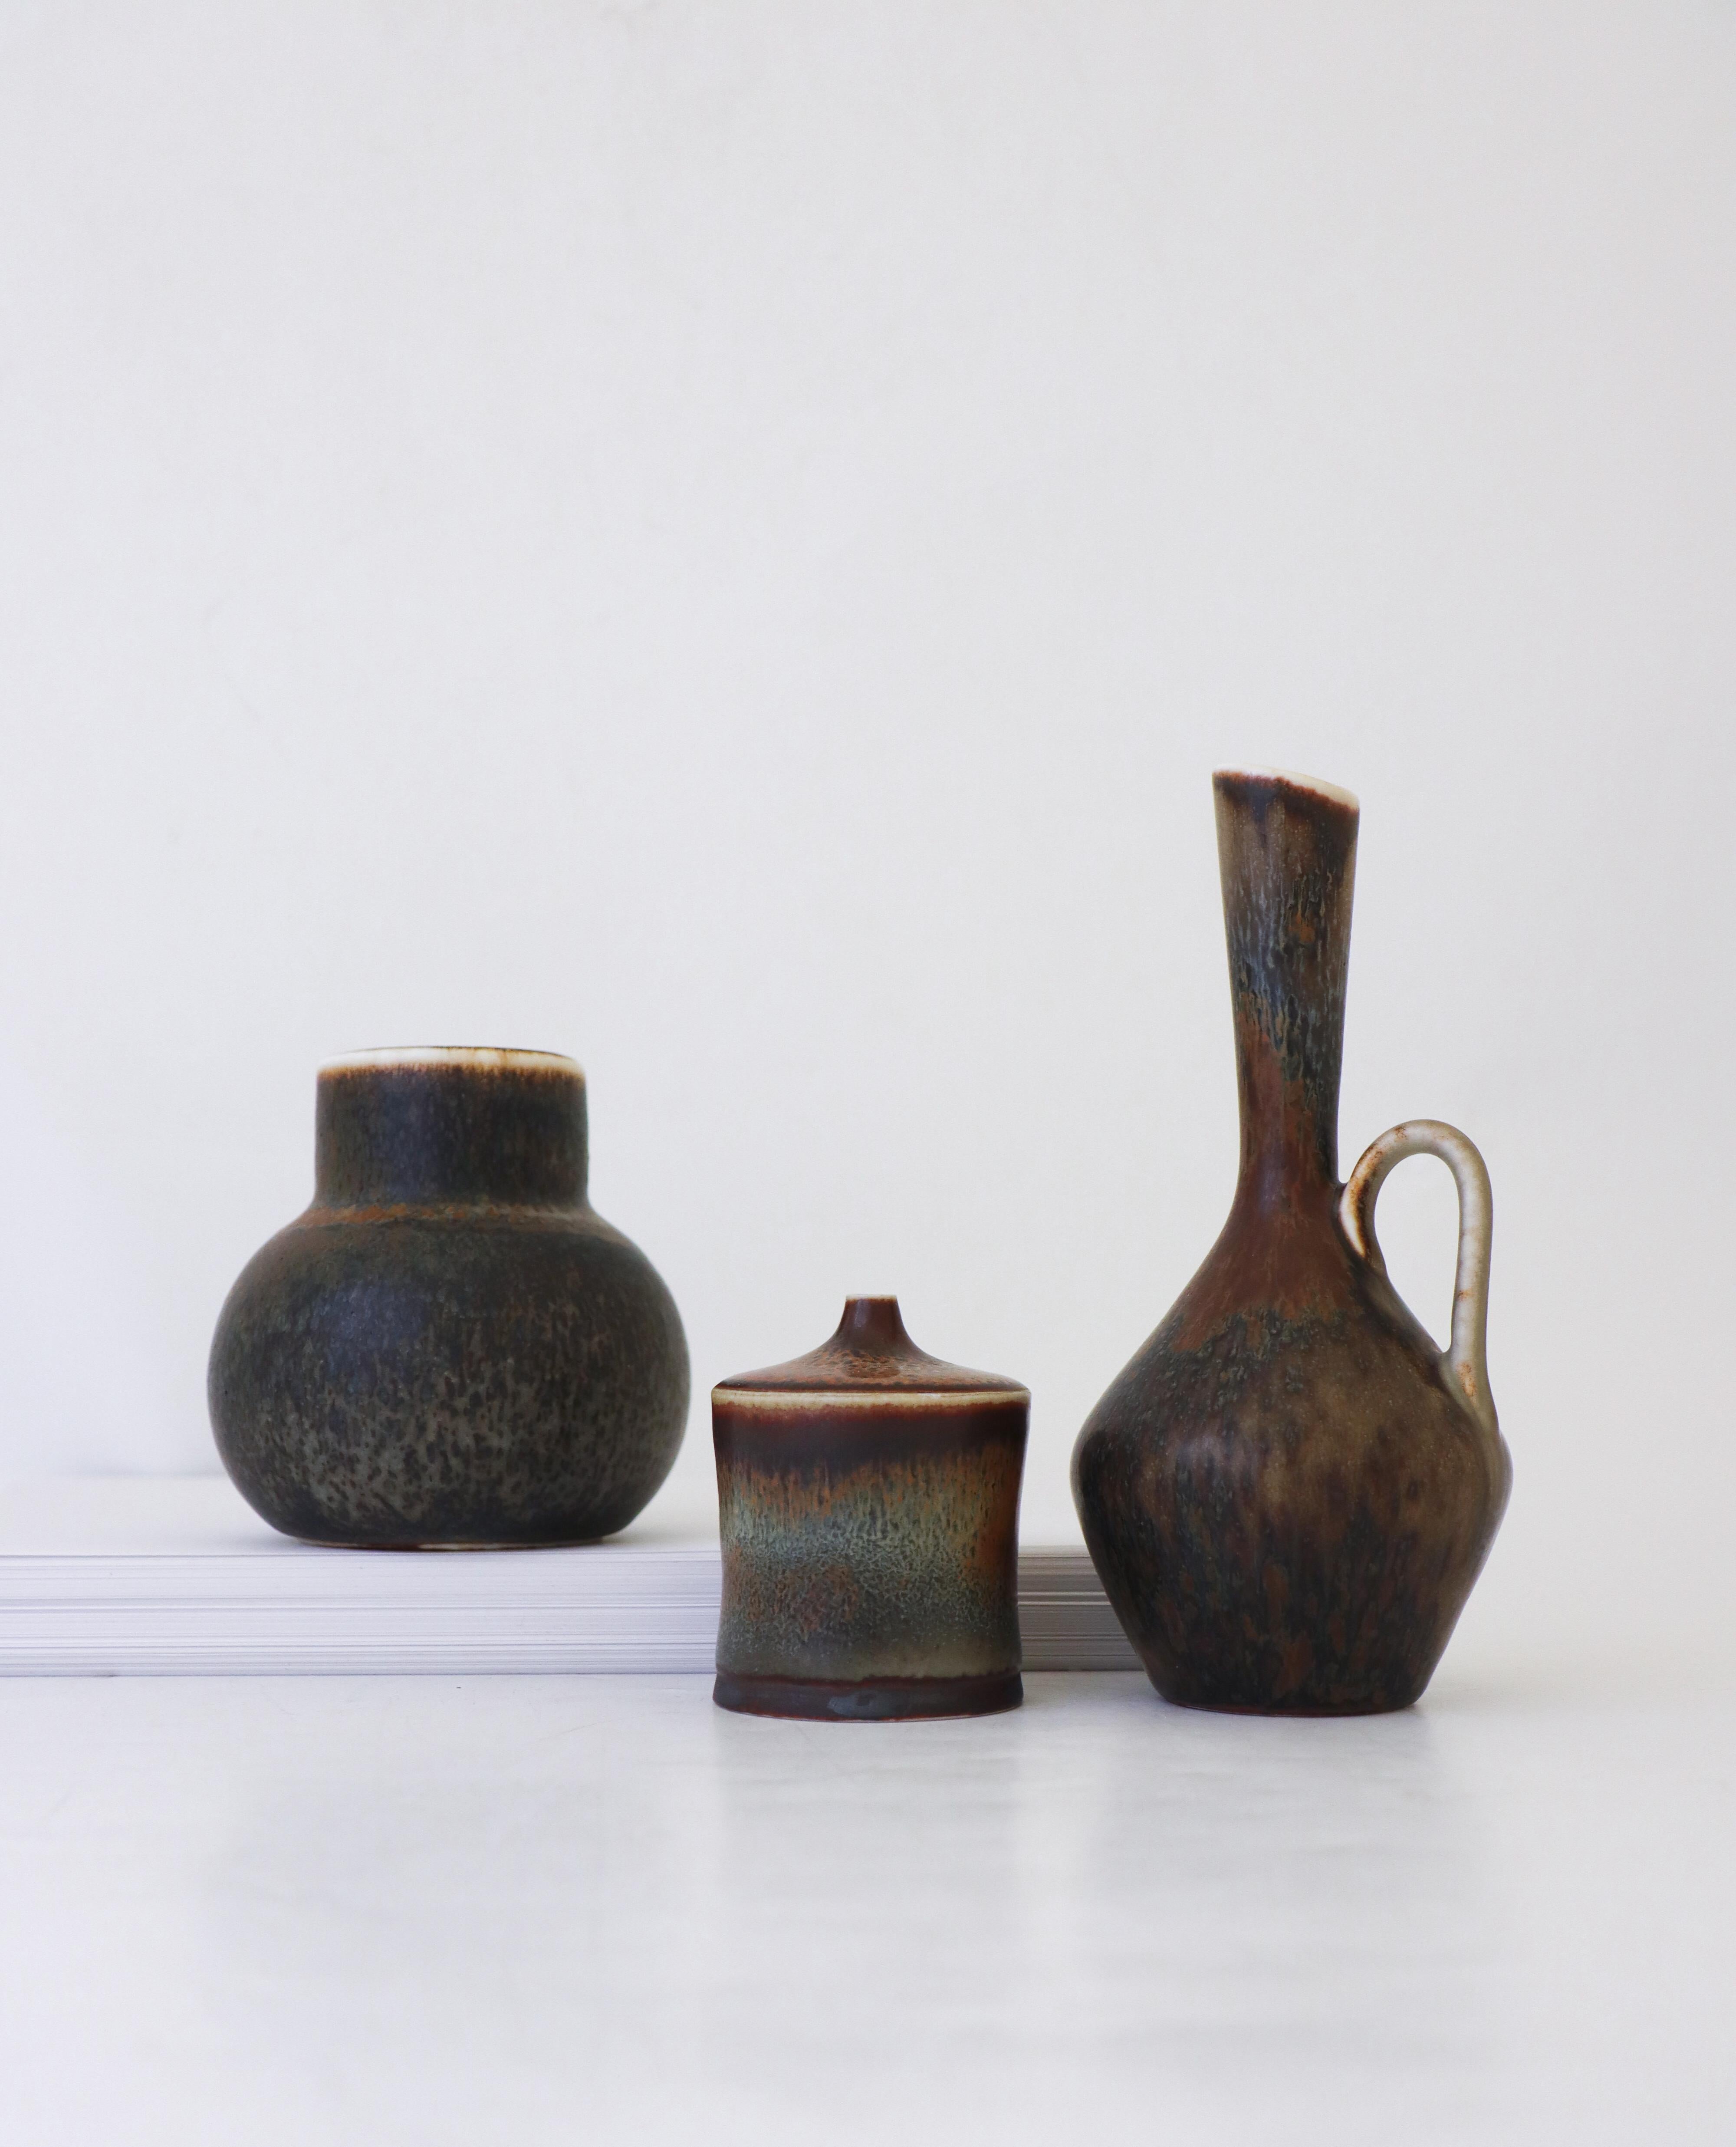 A group of three vases designed by Carl-Harry Stålhane at Rörstrand. They are 18 cm, 10 cm and 7.5 cm high and in excellent condition. The vase to the left is 2nd quality, the one in the middle is a unique vase and both that one and the one to the